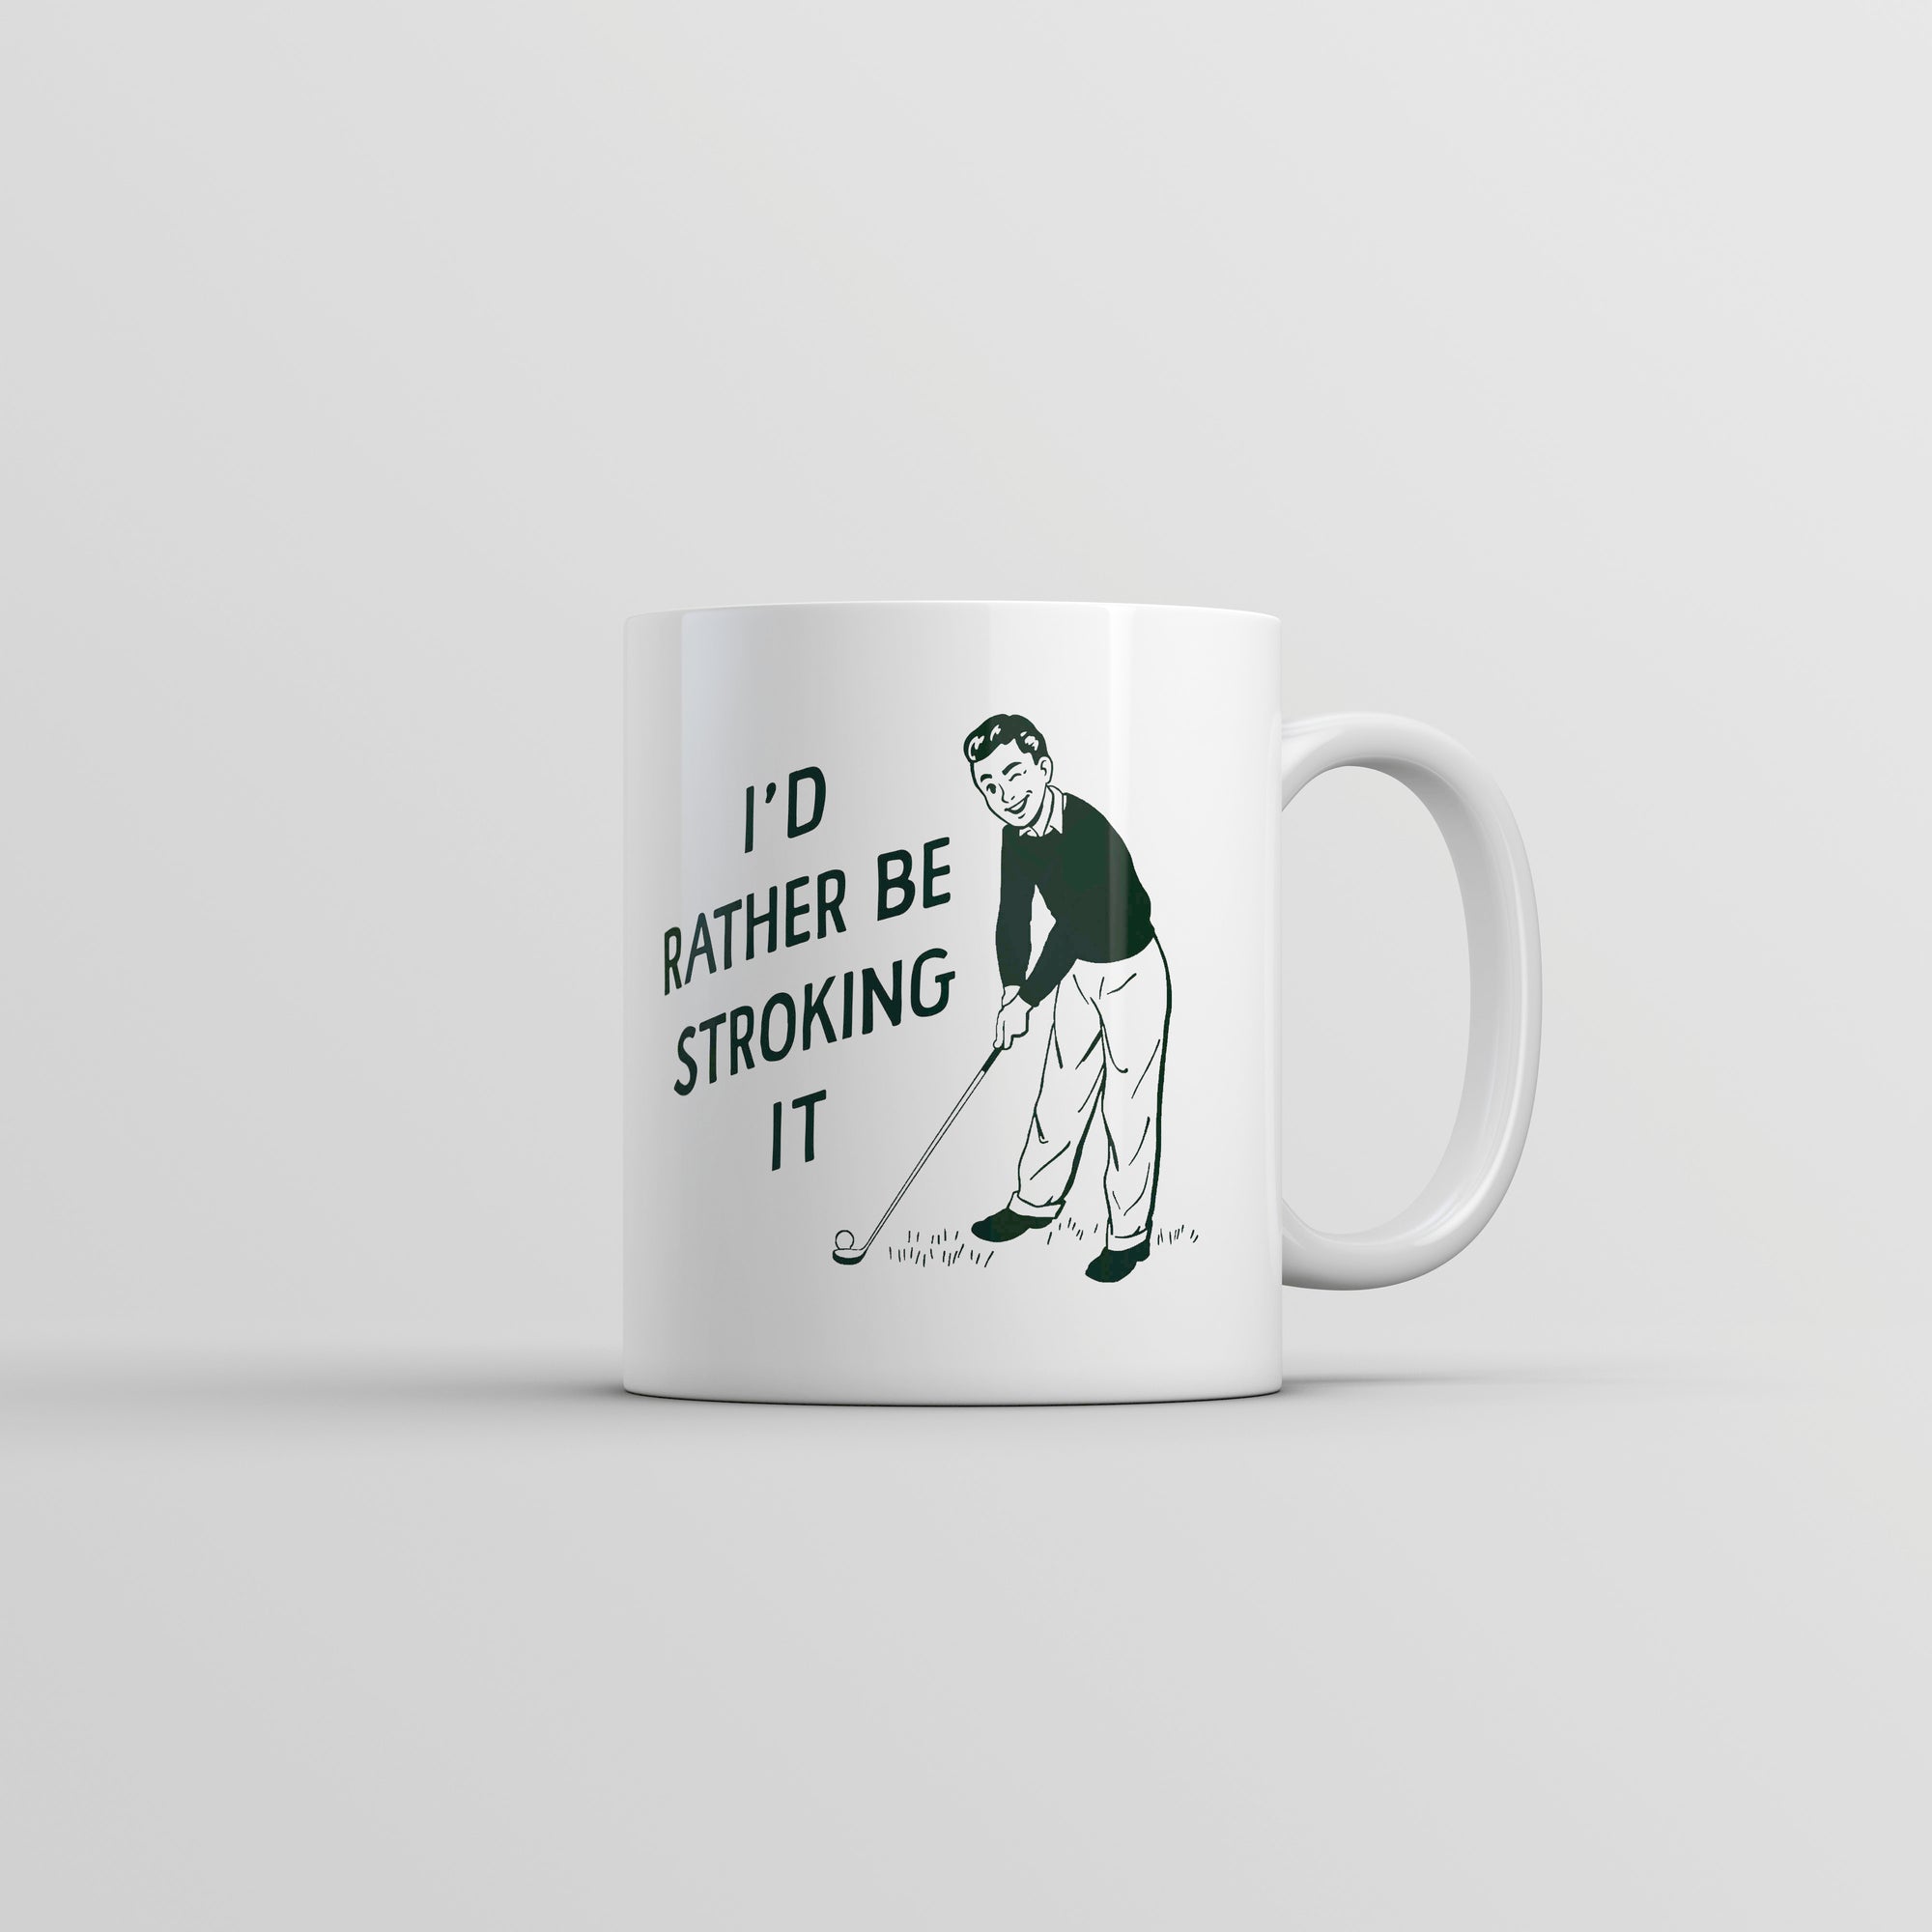 Funny White Id Rather Be Stroking It Coffee Mug Nerdy Golf Sex Tee